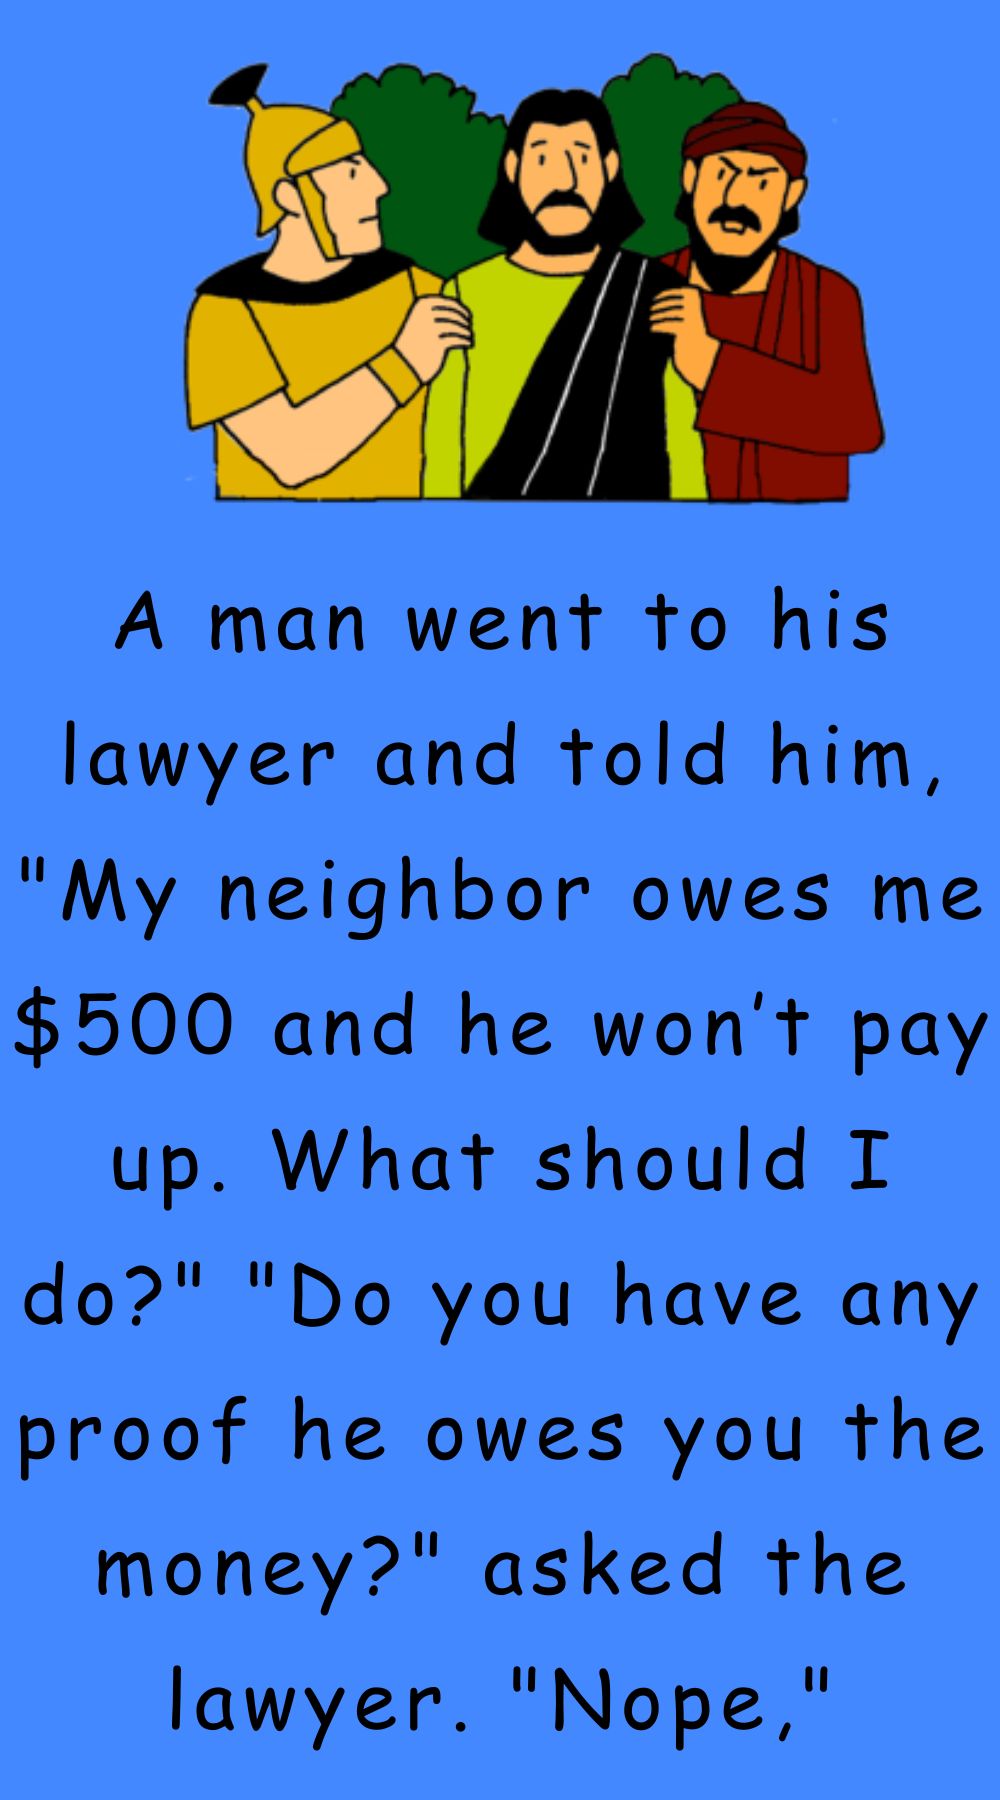 A man went to his lawyer and told him